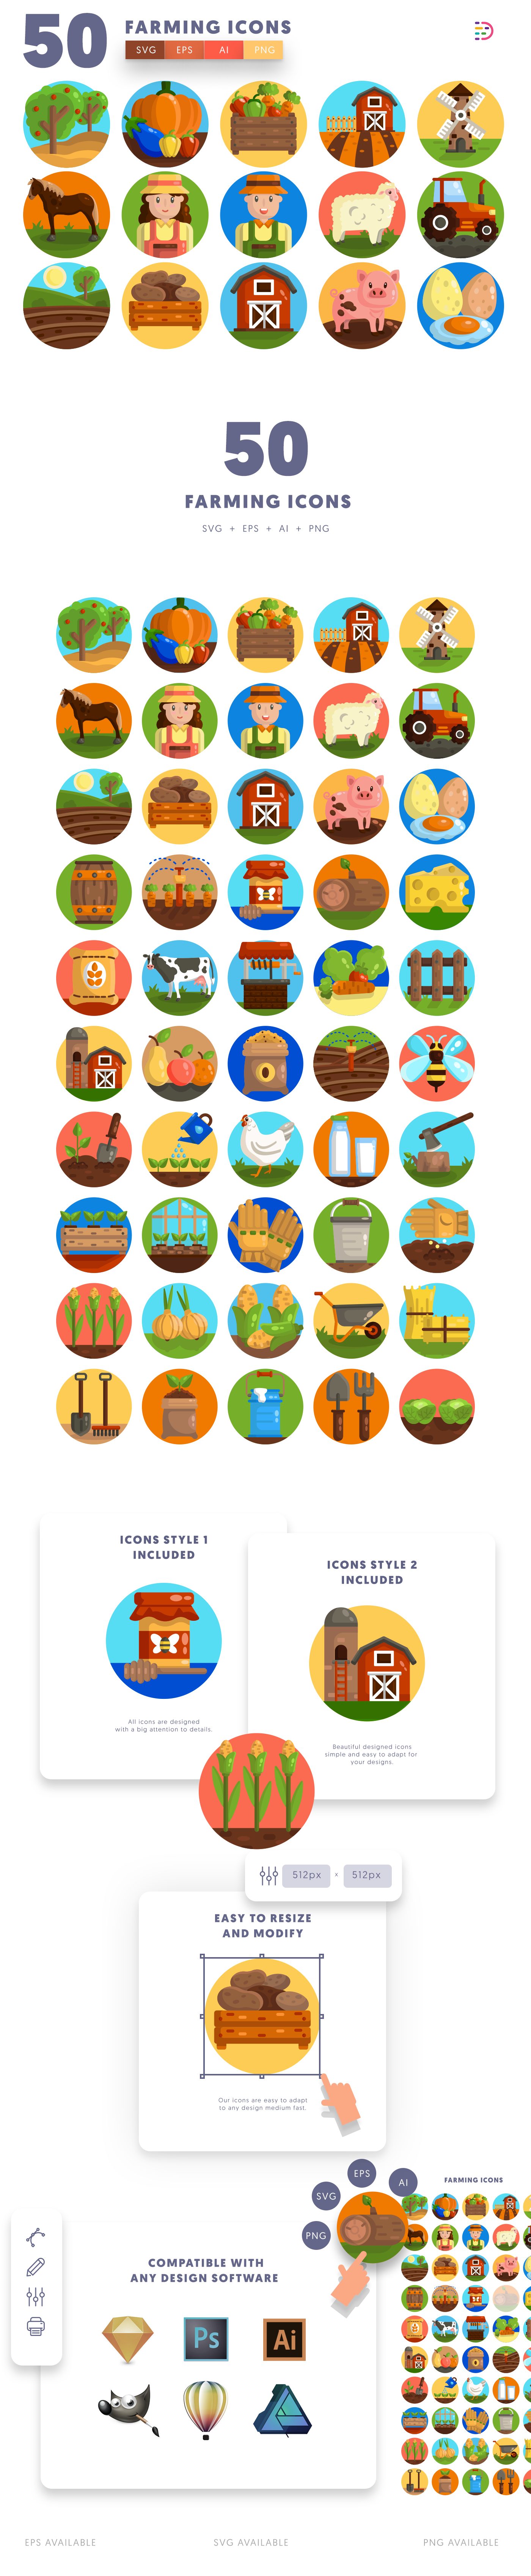 Editable farming icons icon pack, easy to edit and customize icons